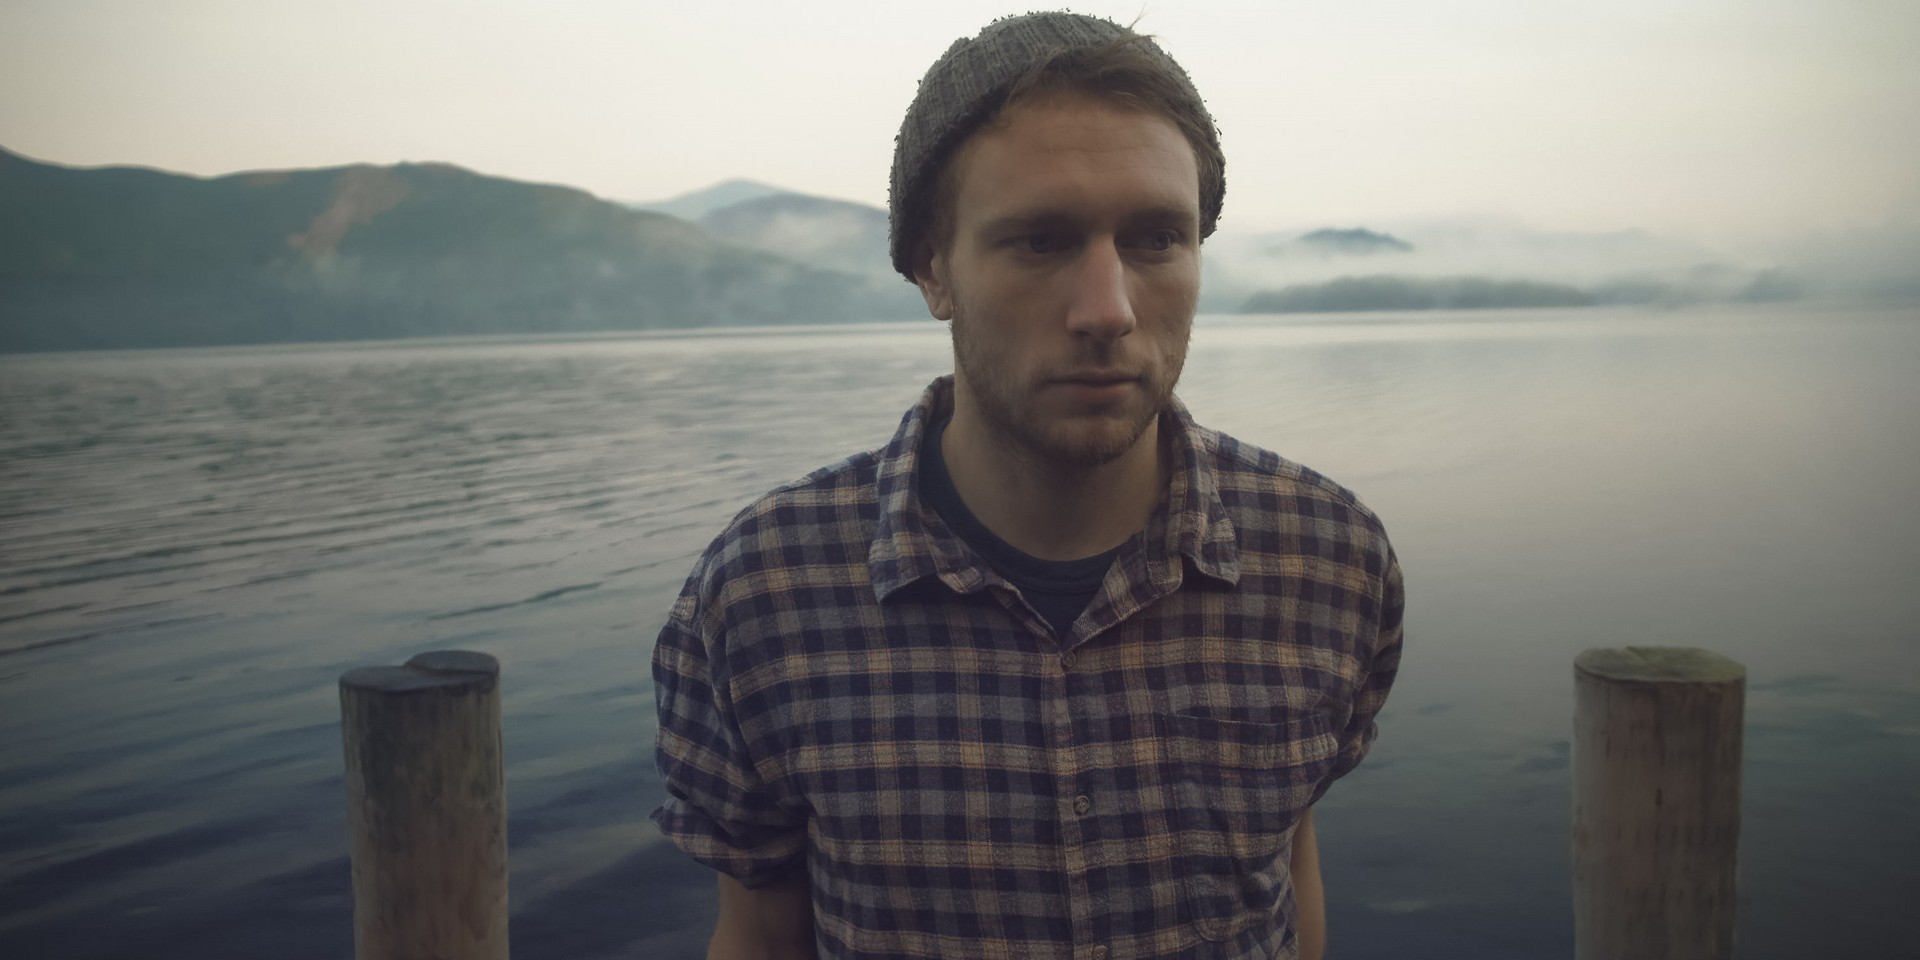 Novo Amor's Singapore shows have been postponed to July